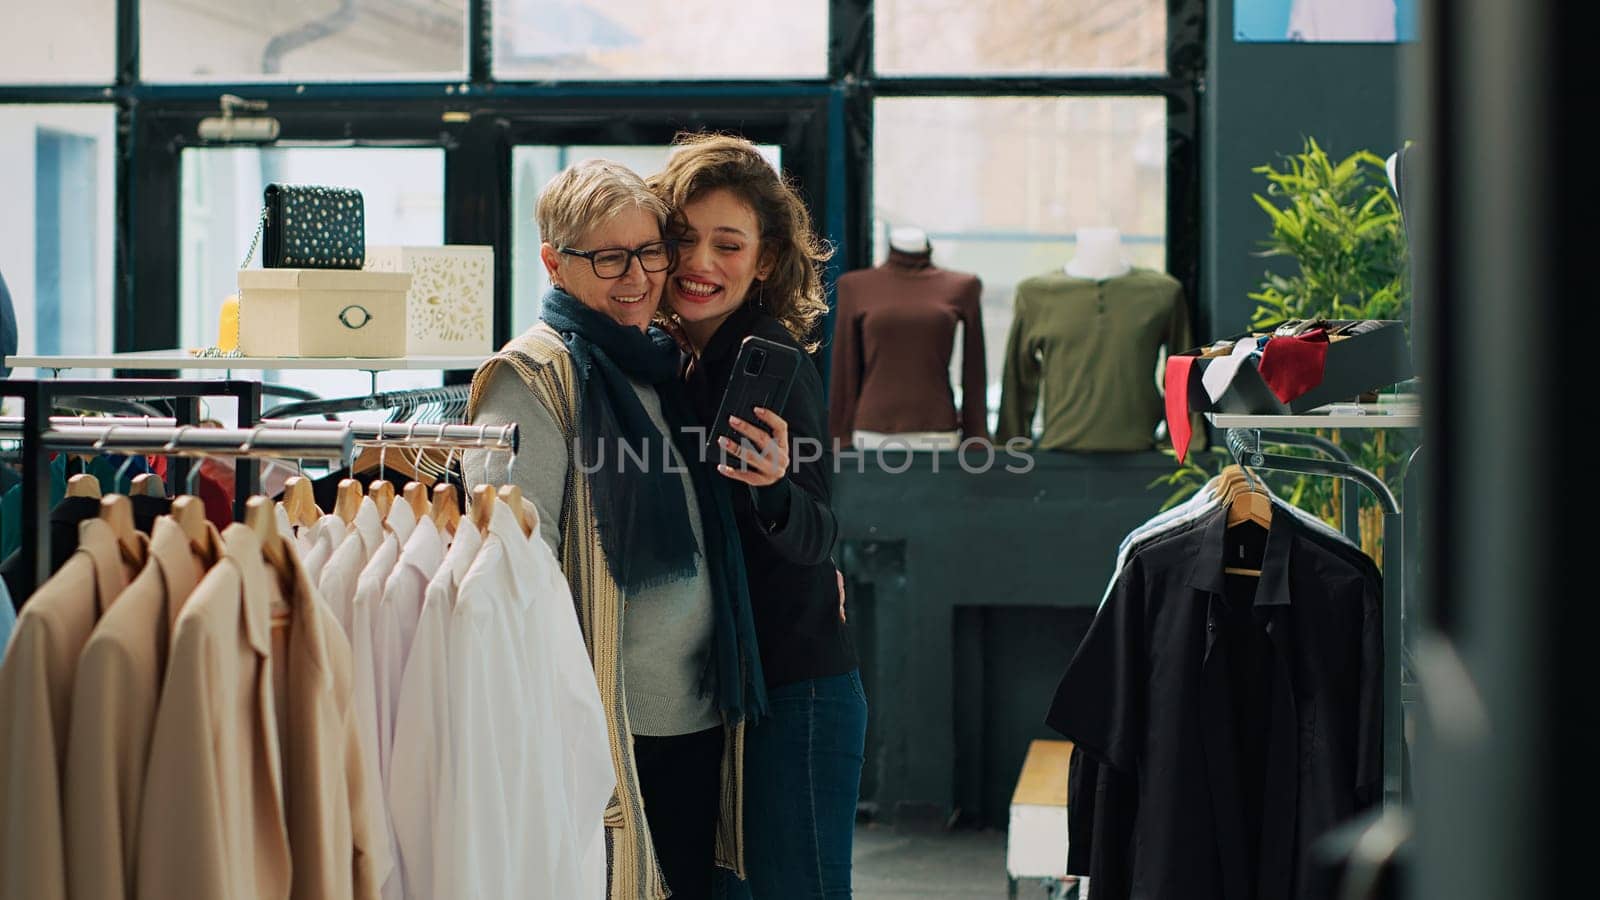 Senior woman and her daughter take photos in department store by DCStudio